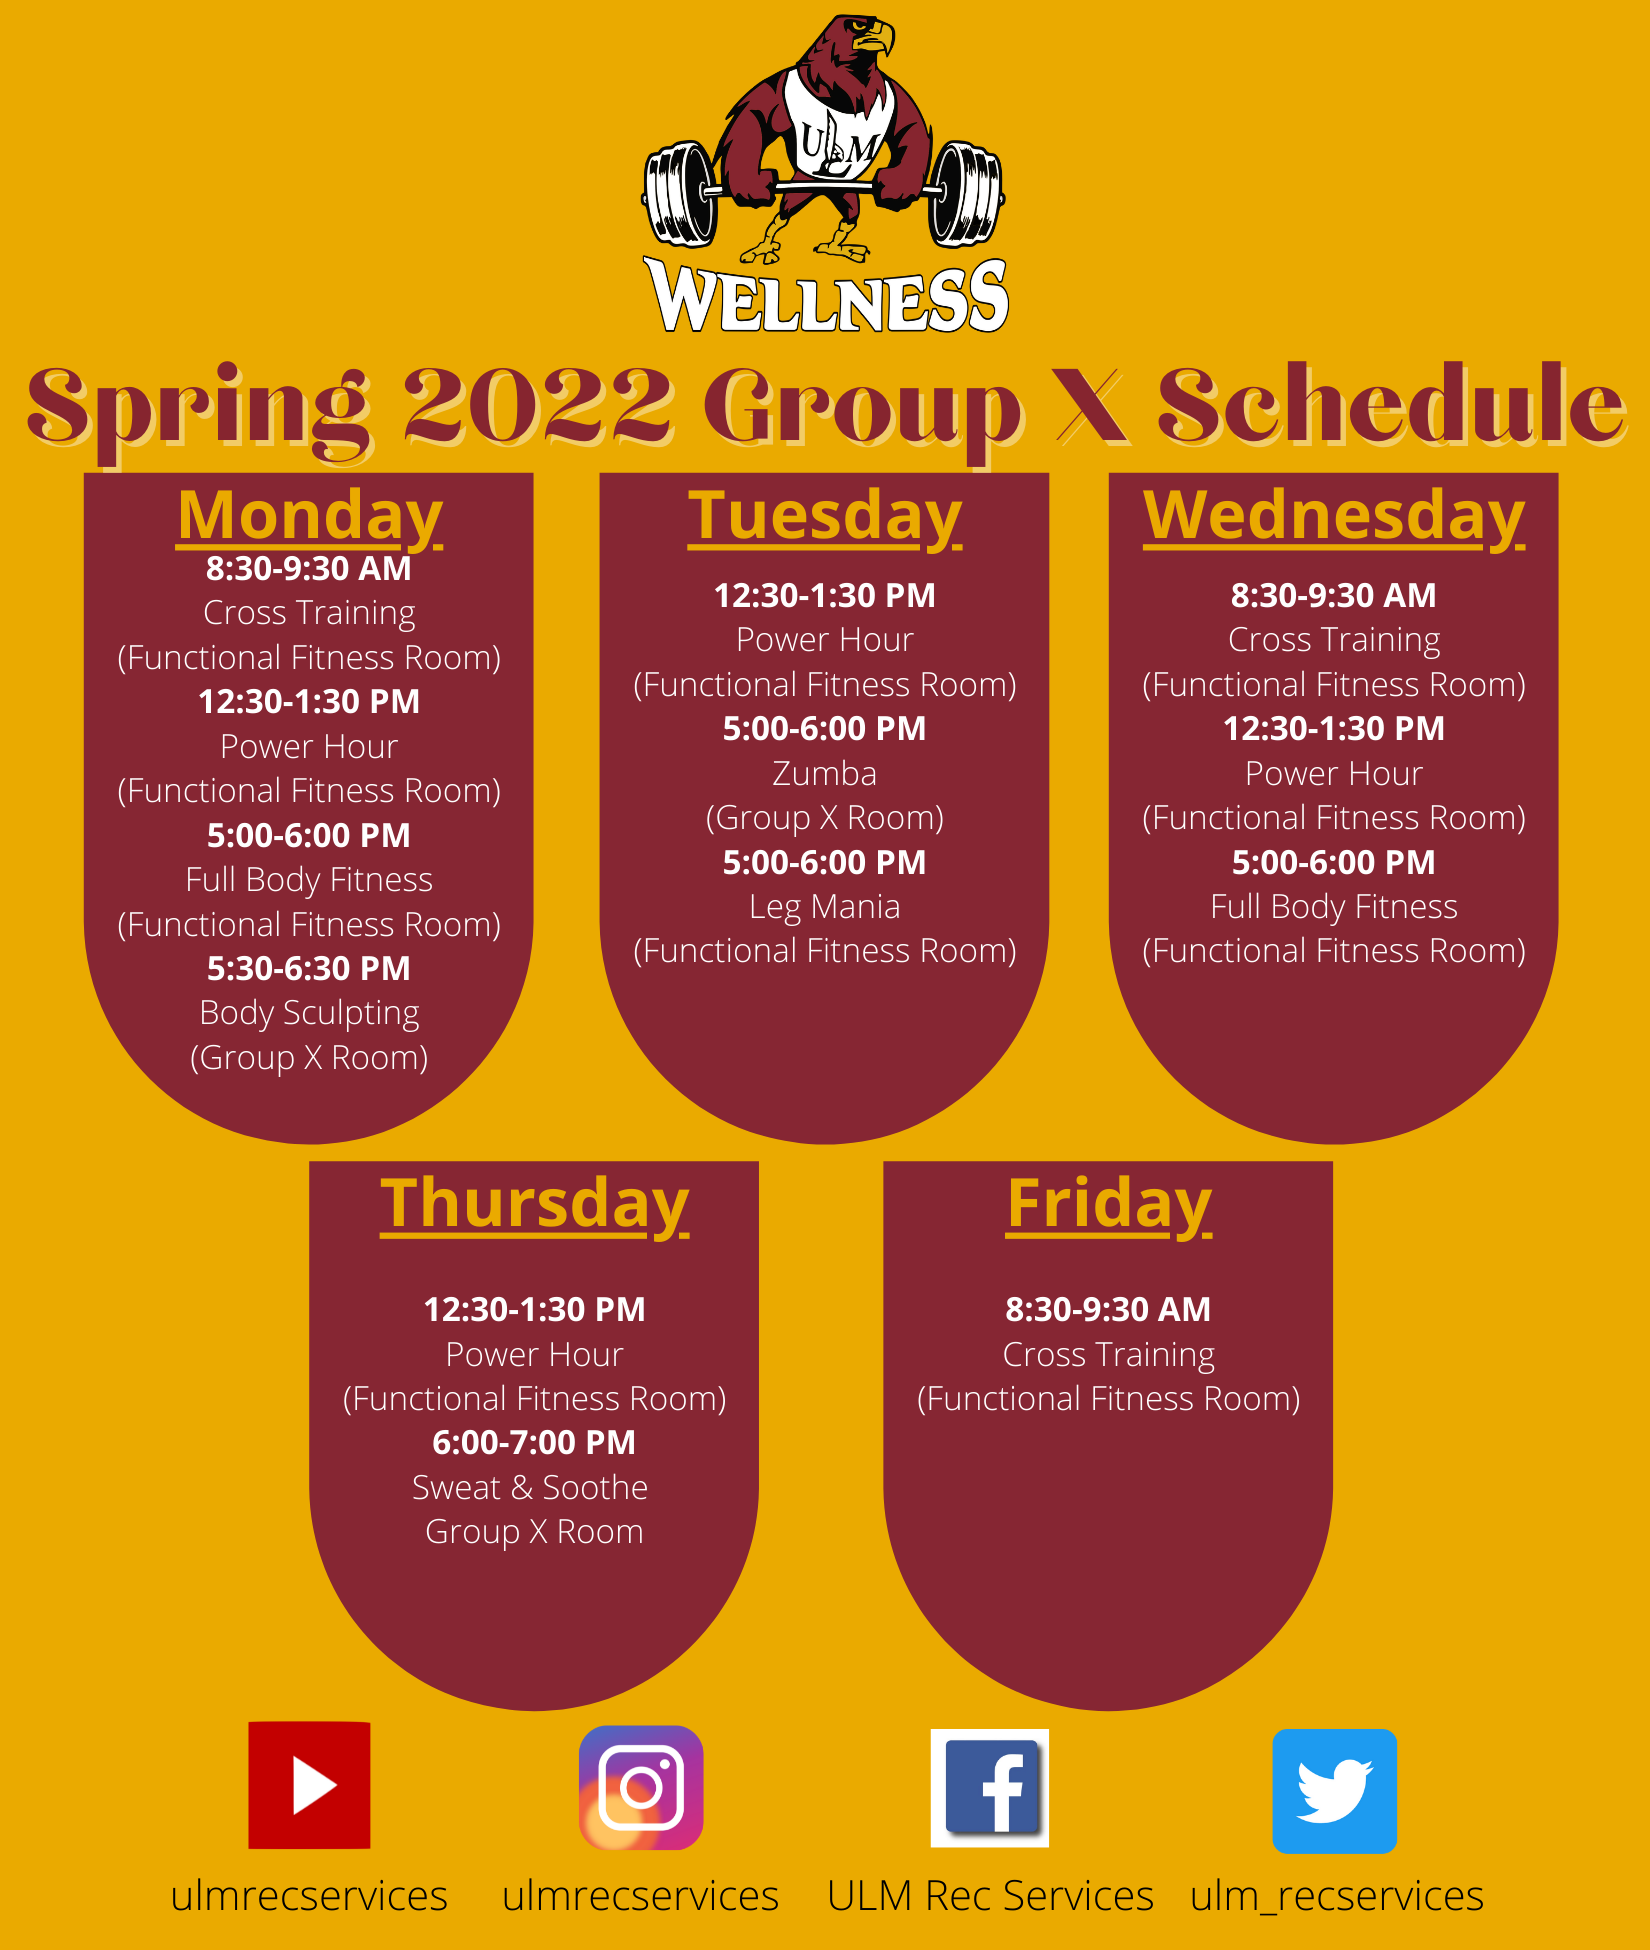 Spring 2022 Group X Schedule